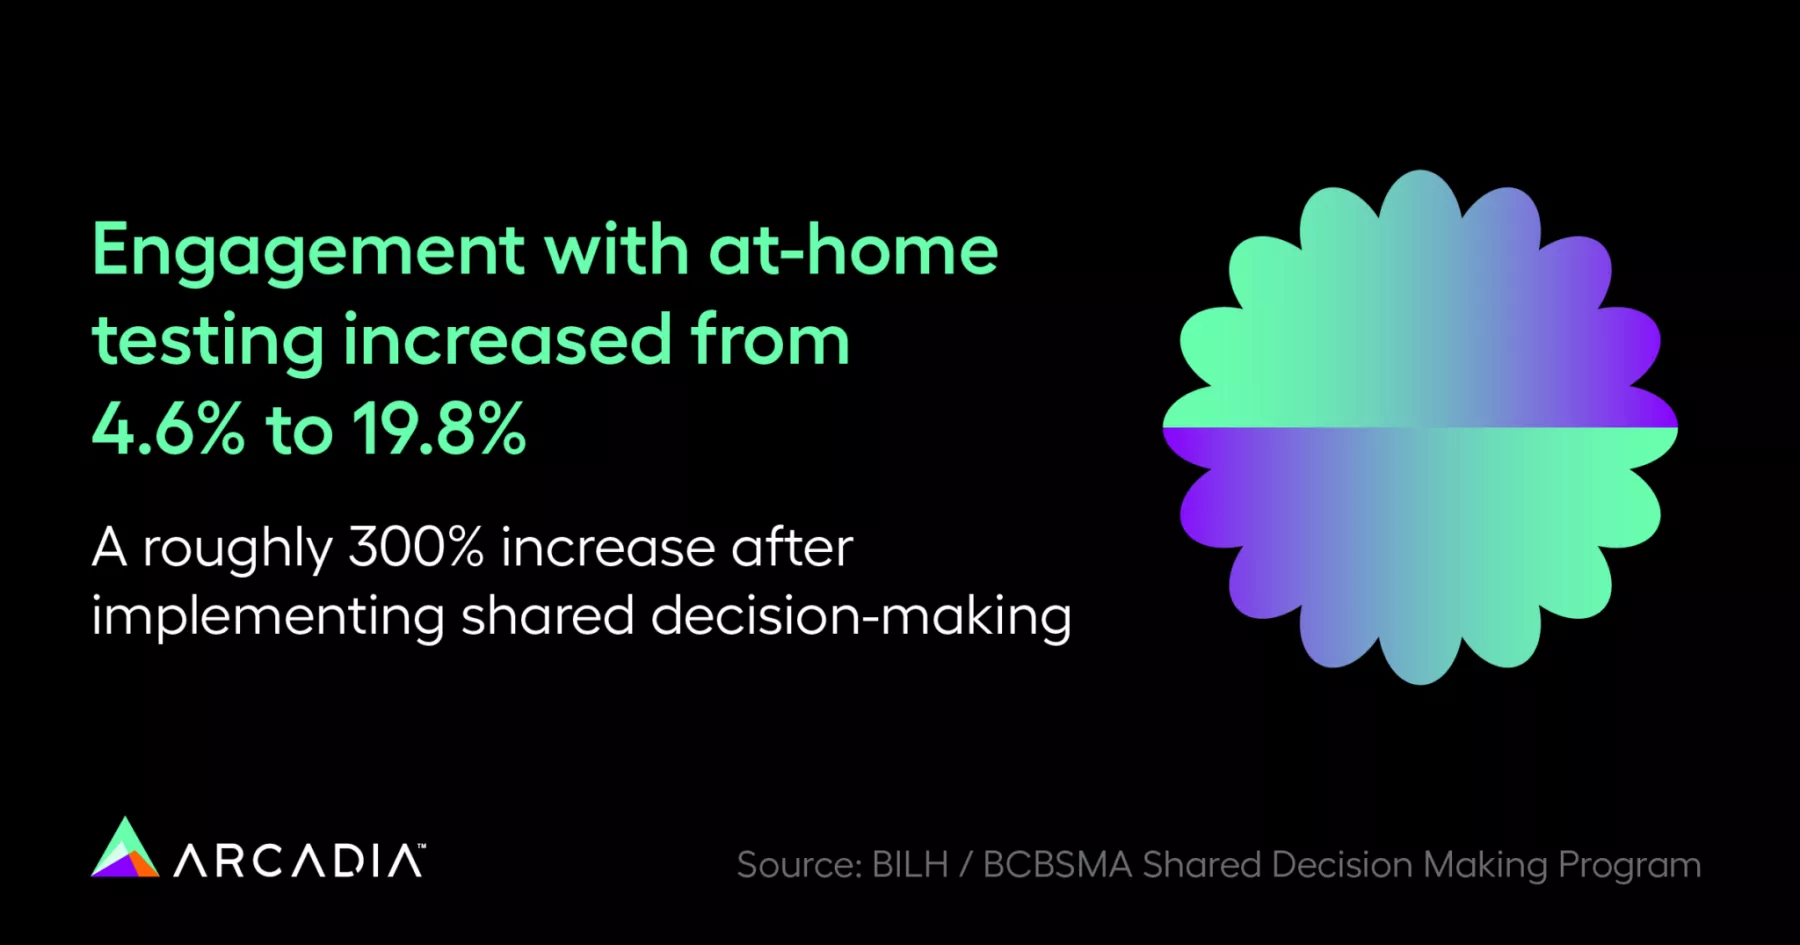 Patient engagement with at-home testing increased from 4.6% to 19.8%. This is a roughly 300% increase after implementing shared decision-making.